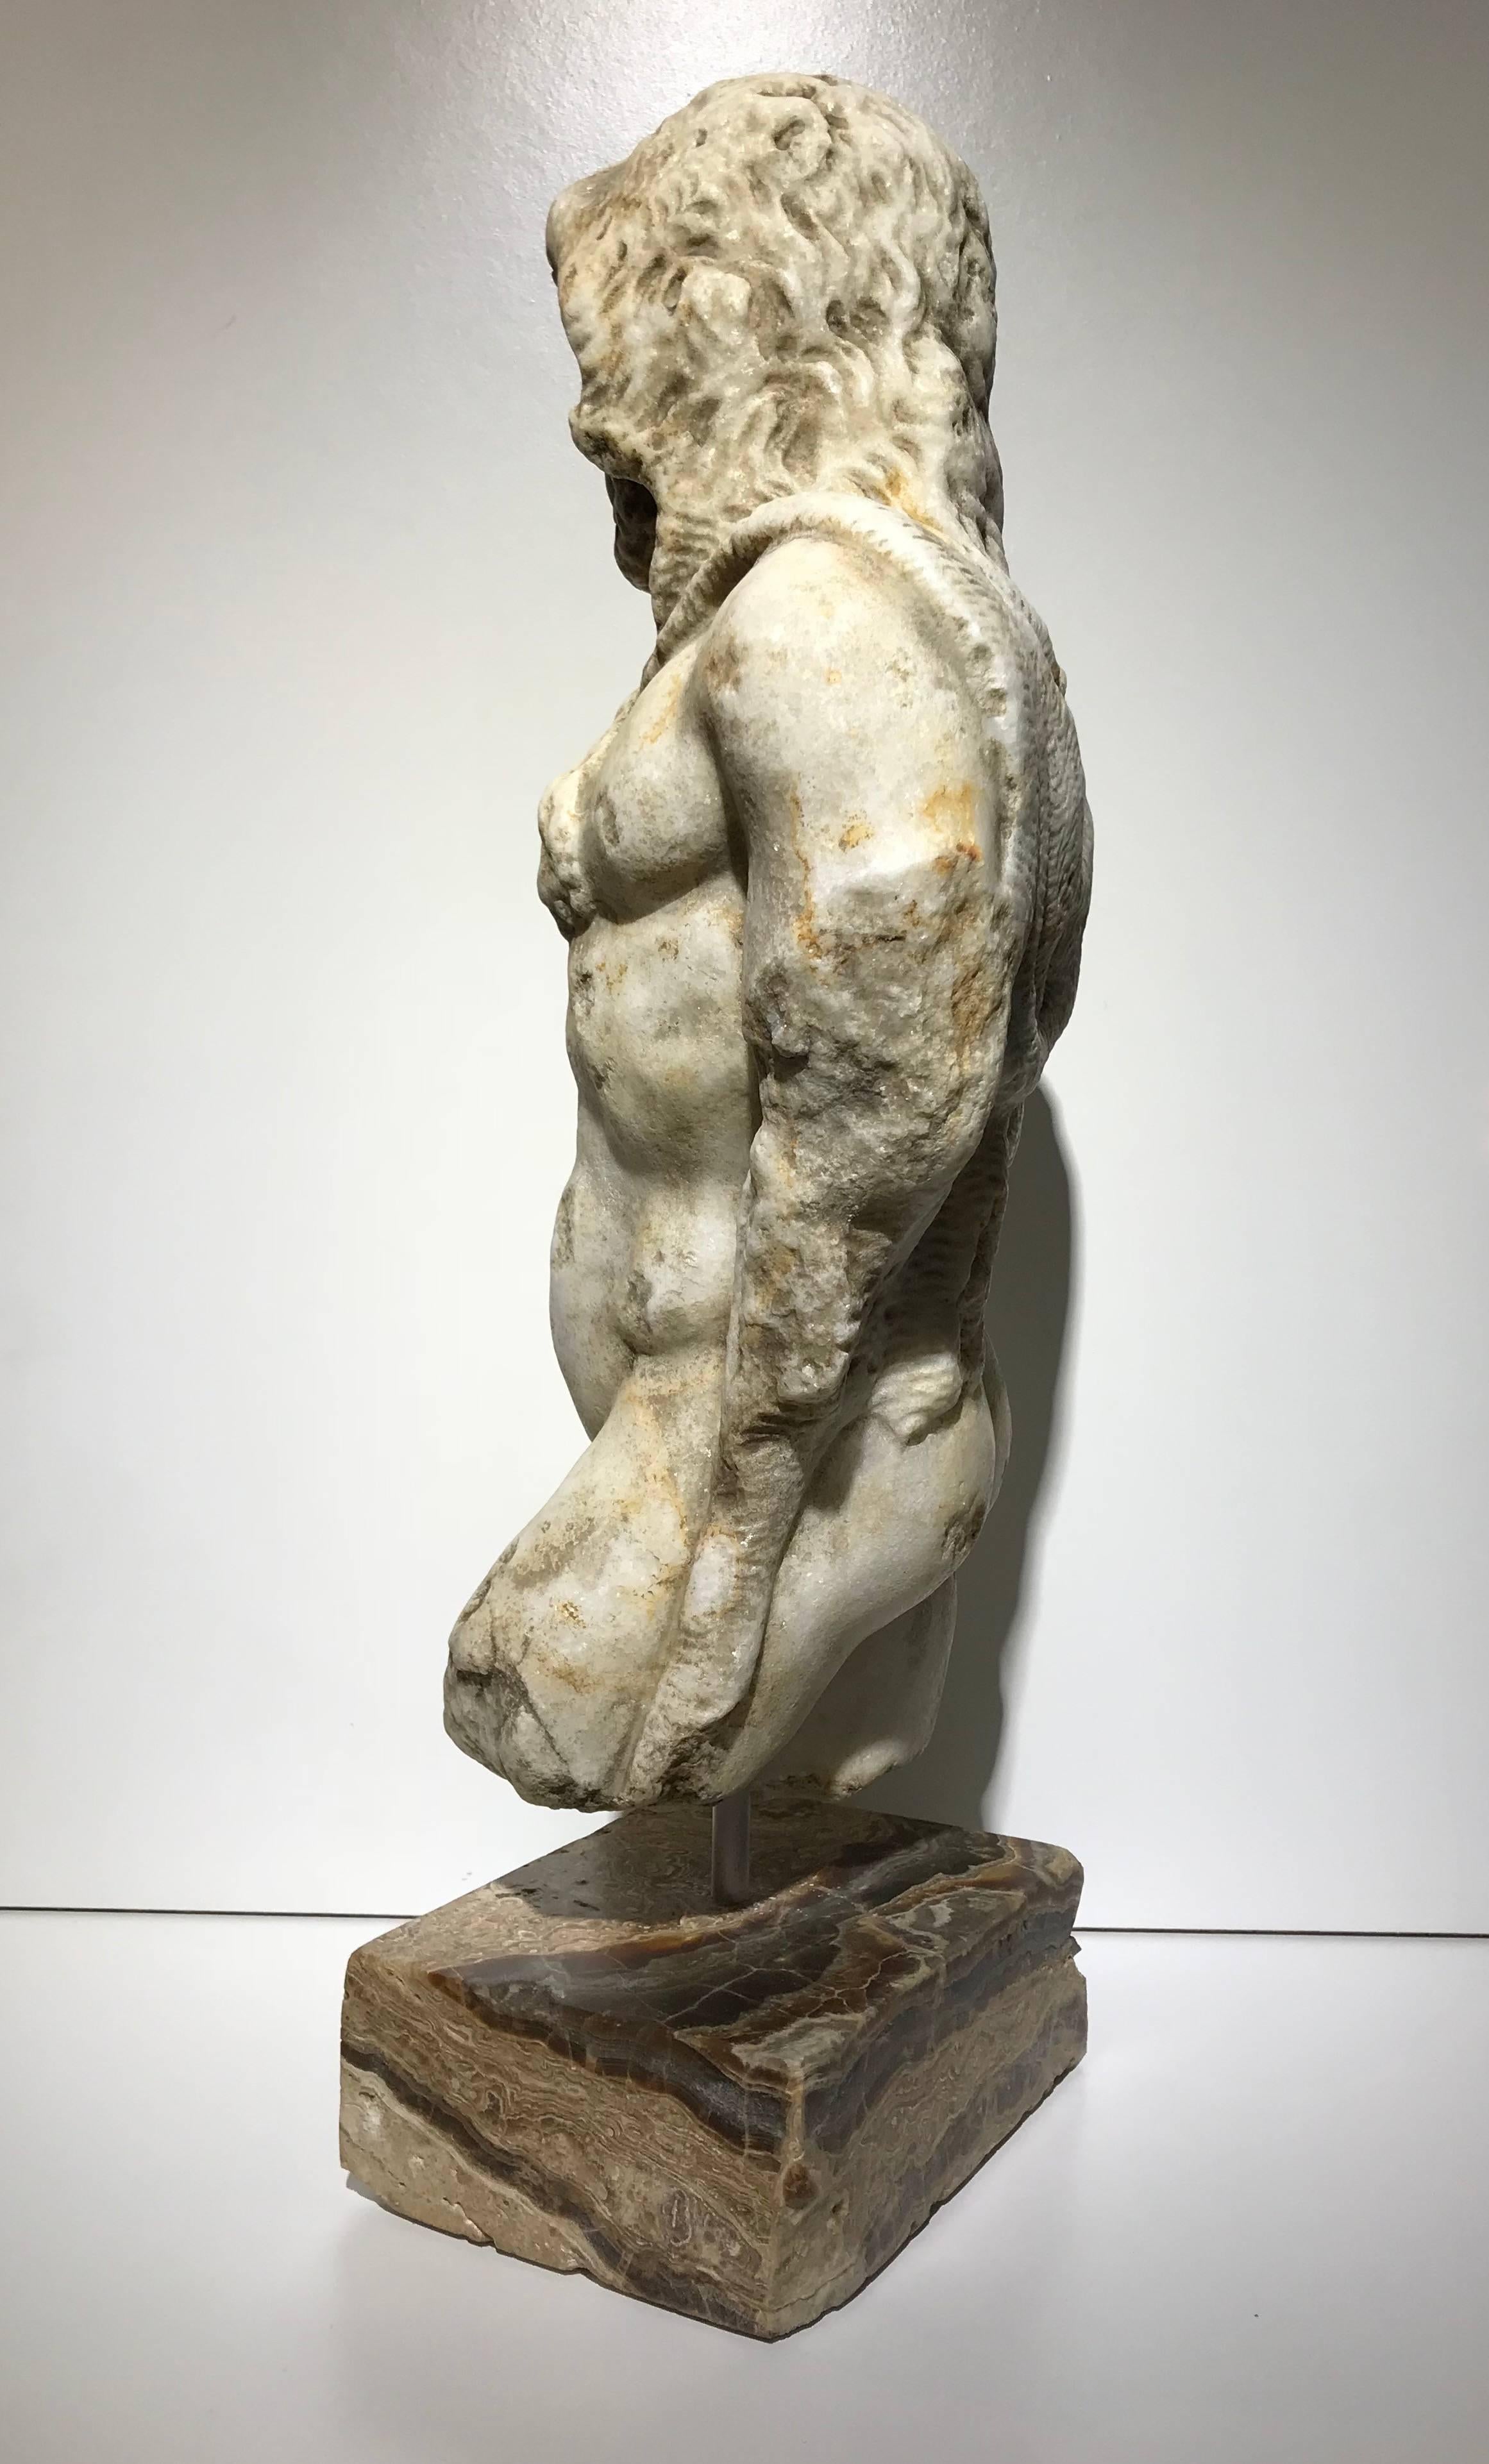 Hand-Carved 20th Century Classical Roman Marble Sculpture of Emperor Commodus as Hercules